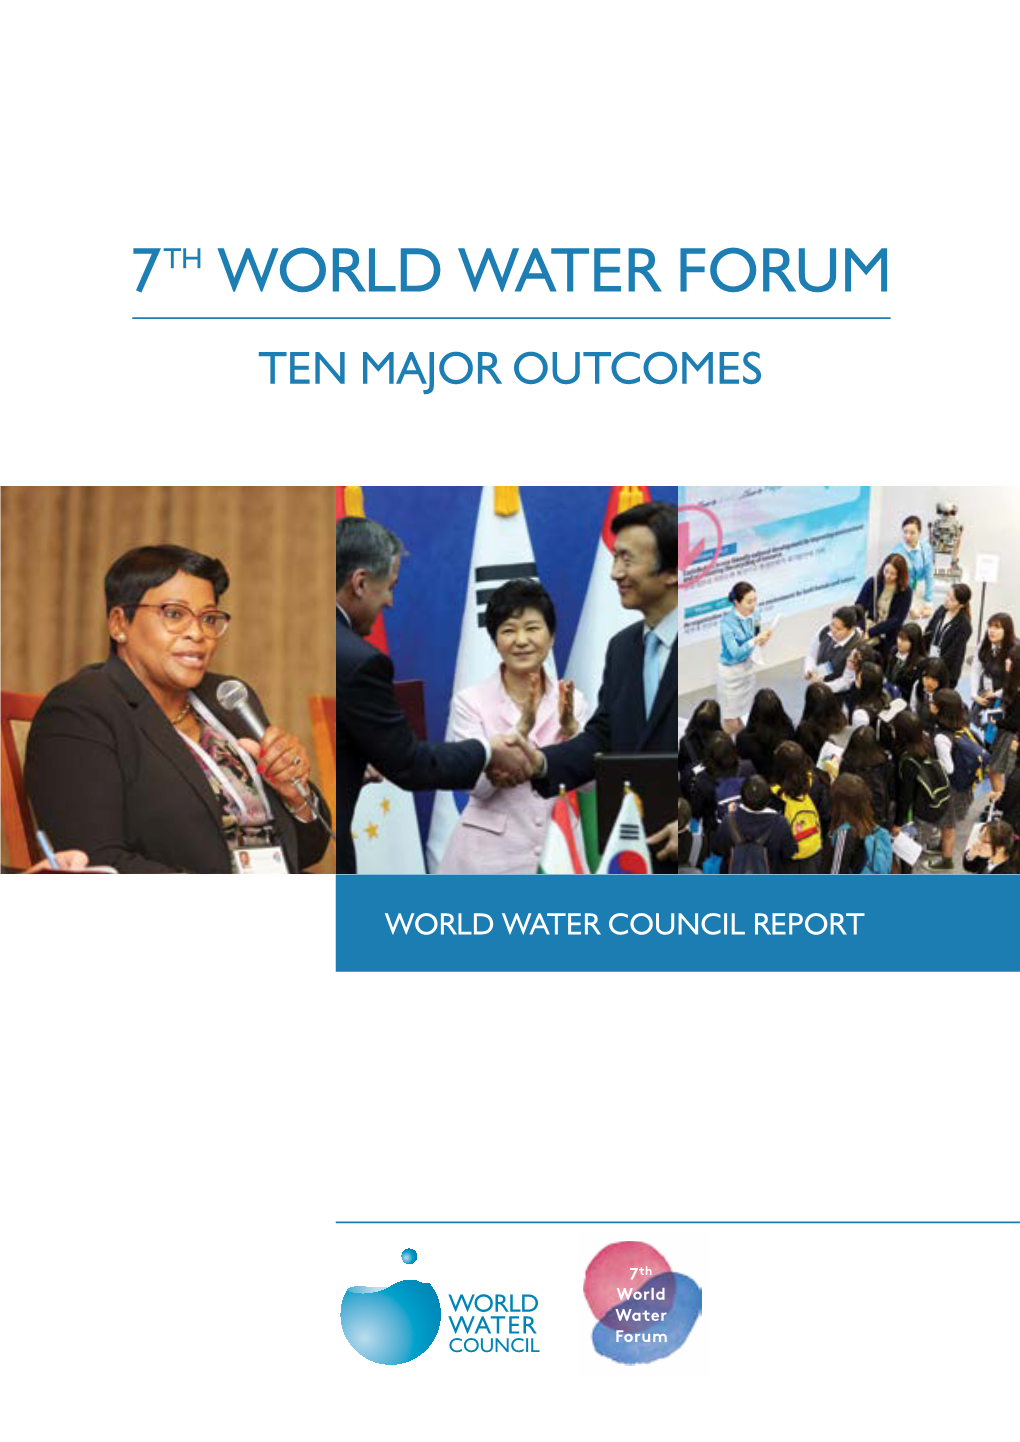 On the Major Outcomes of the 7Th World Water Forum